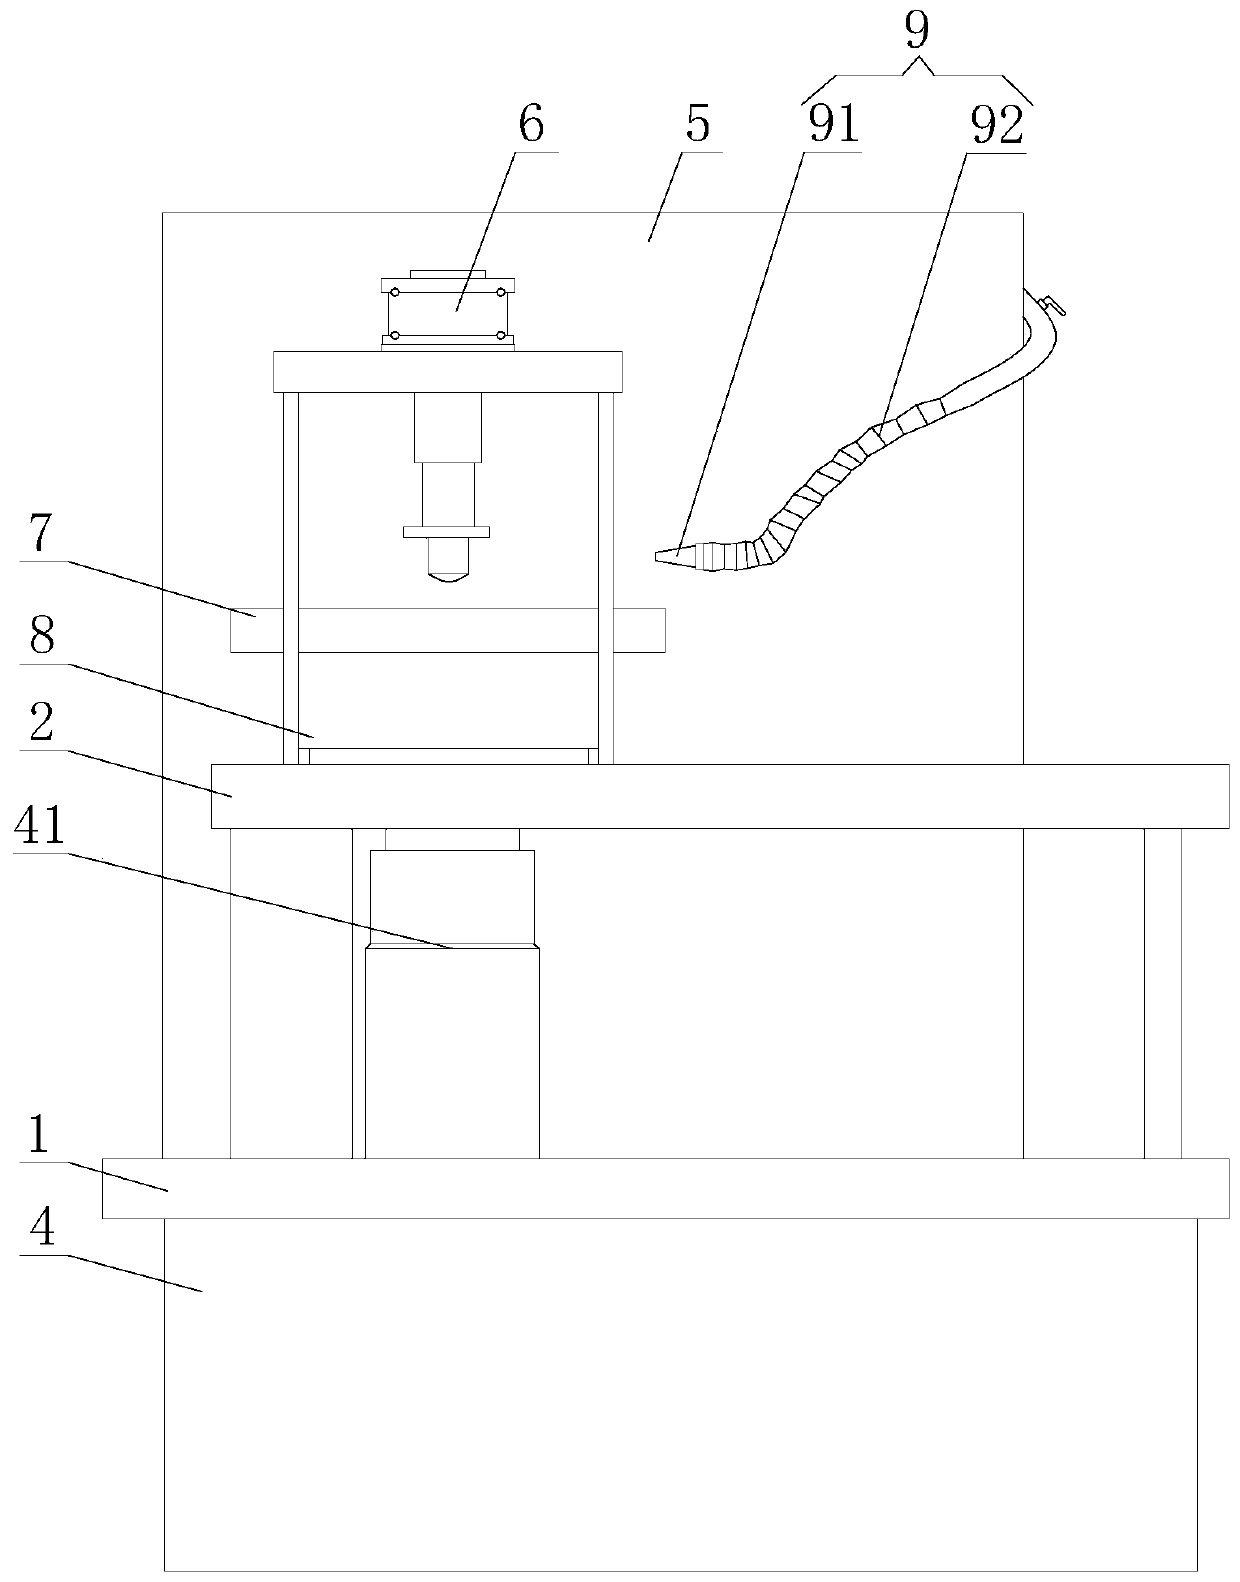 Circulating cooling device for processing a heavy hammer slice